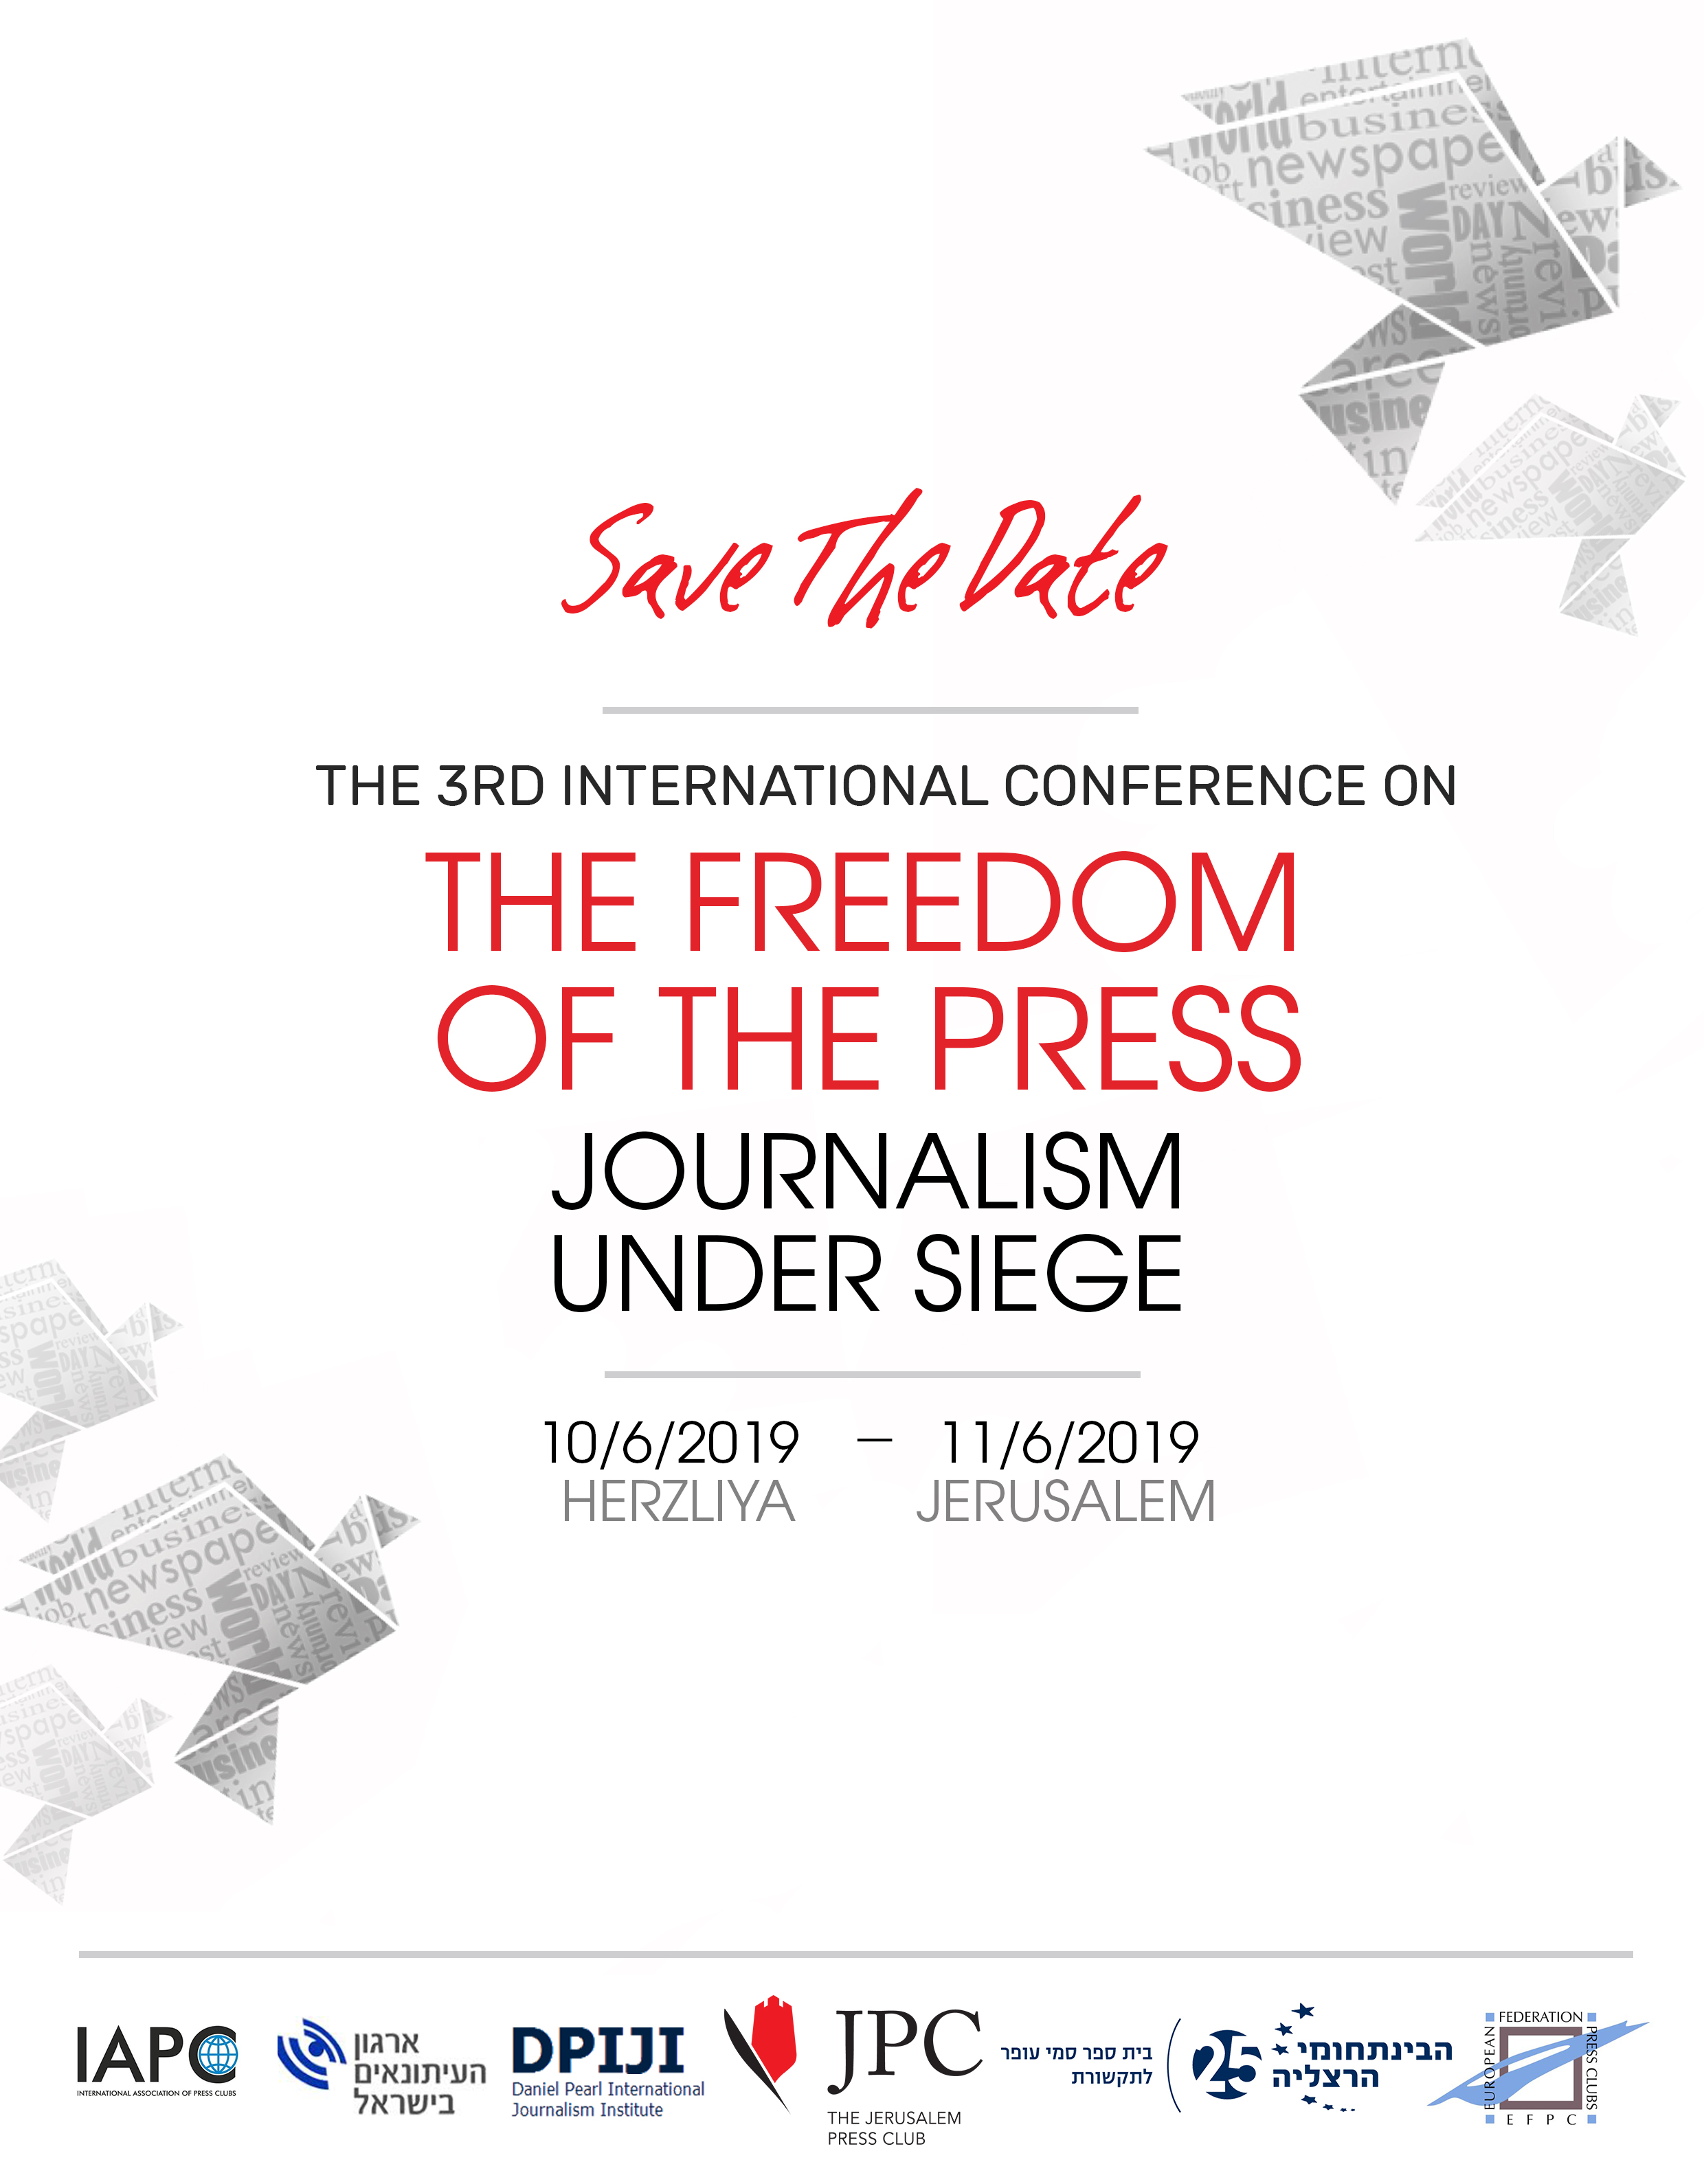 https://pressclubs.org/the-3rd-international-conference-on-the-freedom-of-the-press/